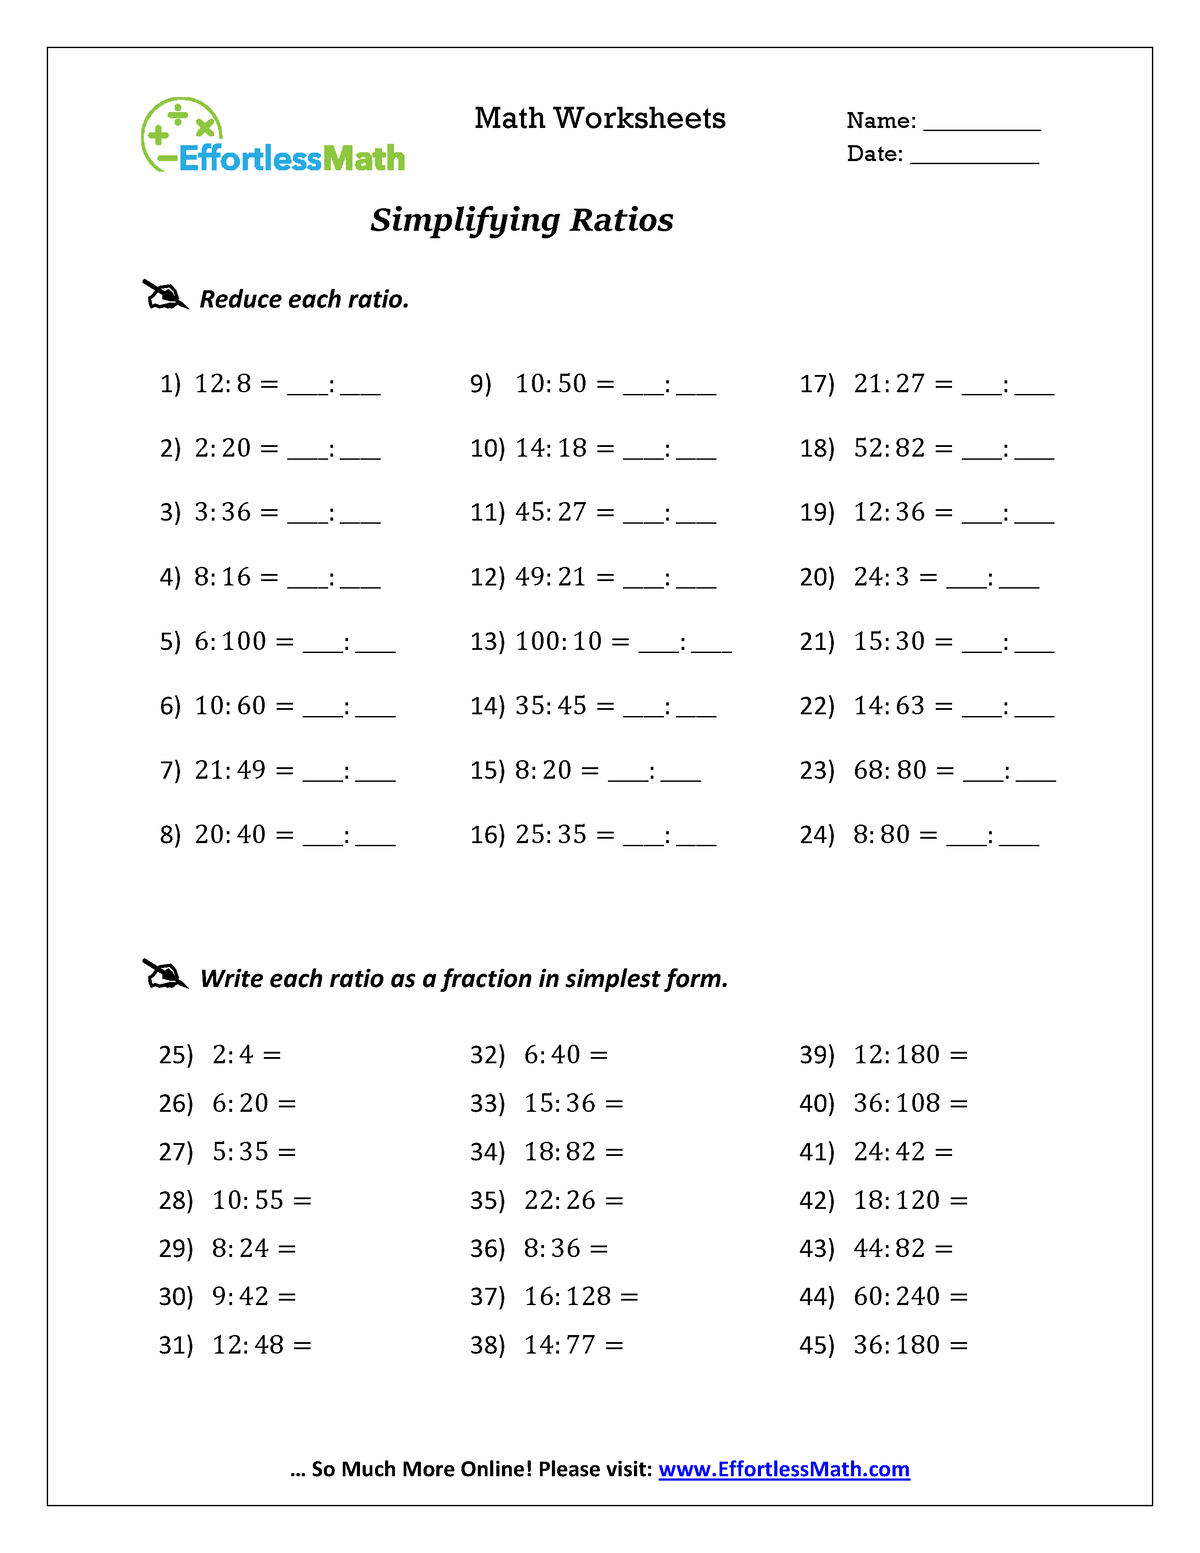 simplifying-ratios-for-noobs-and-more-math-worksheets-name